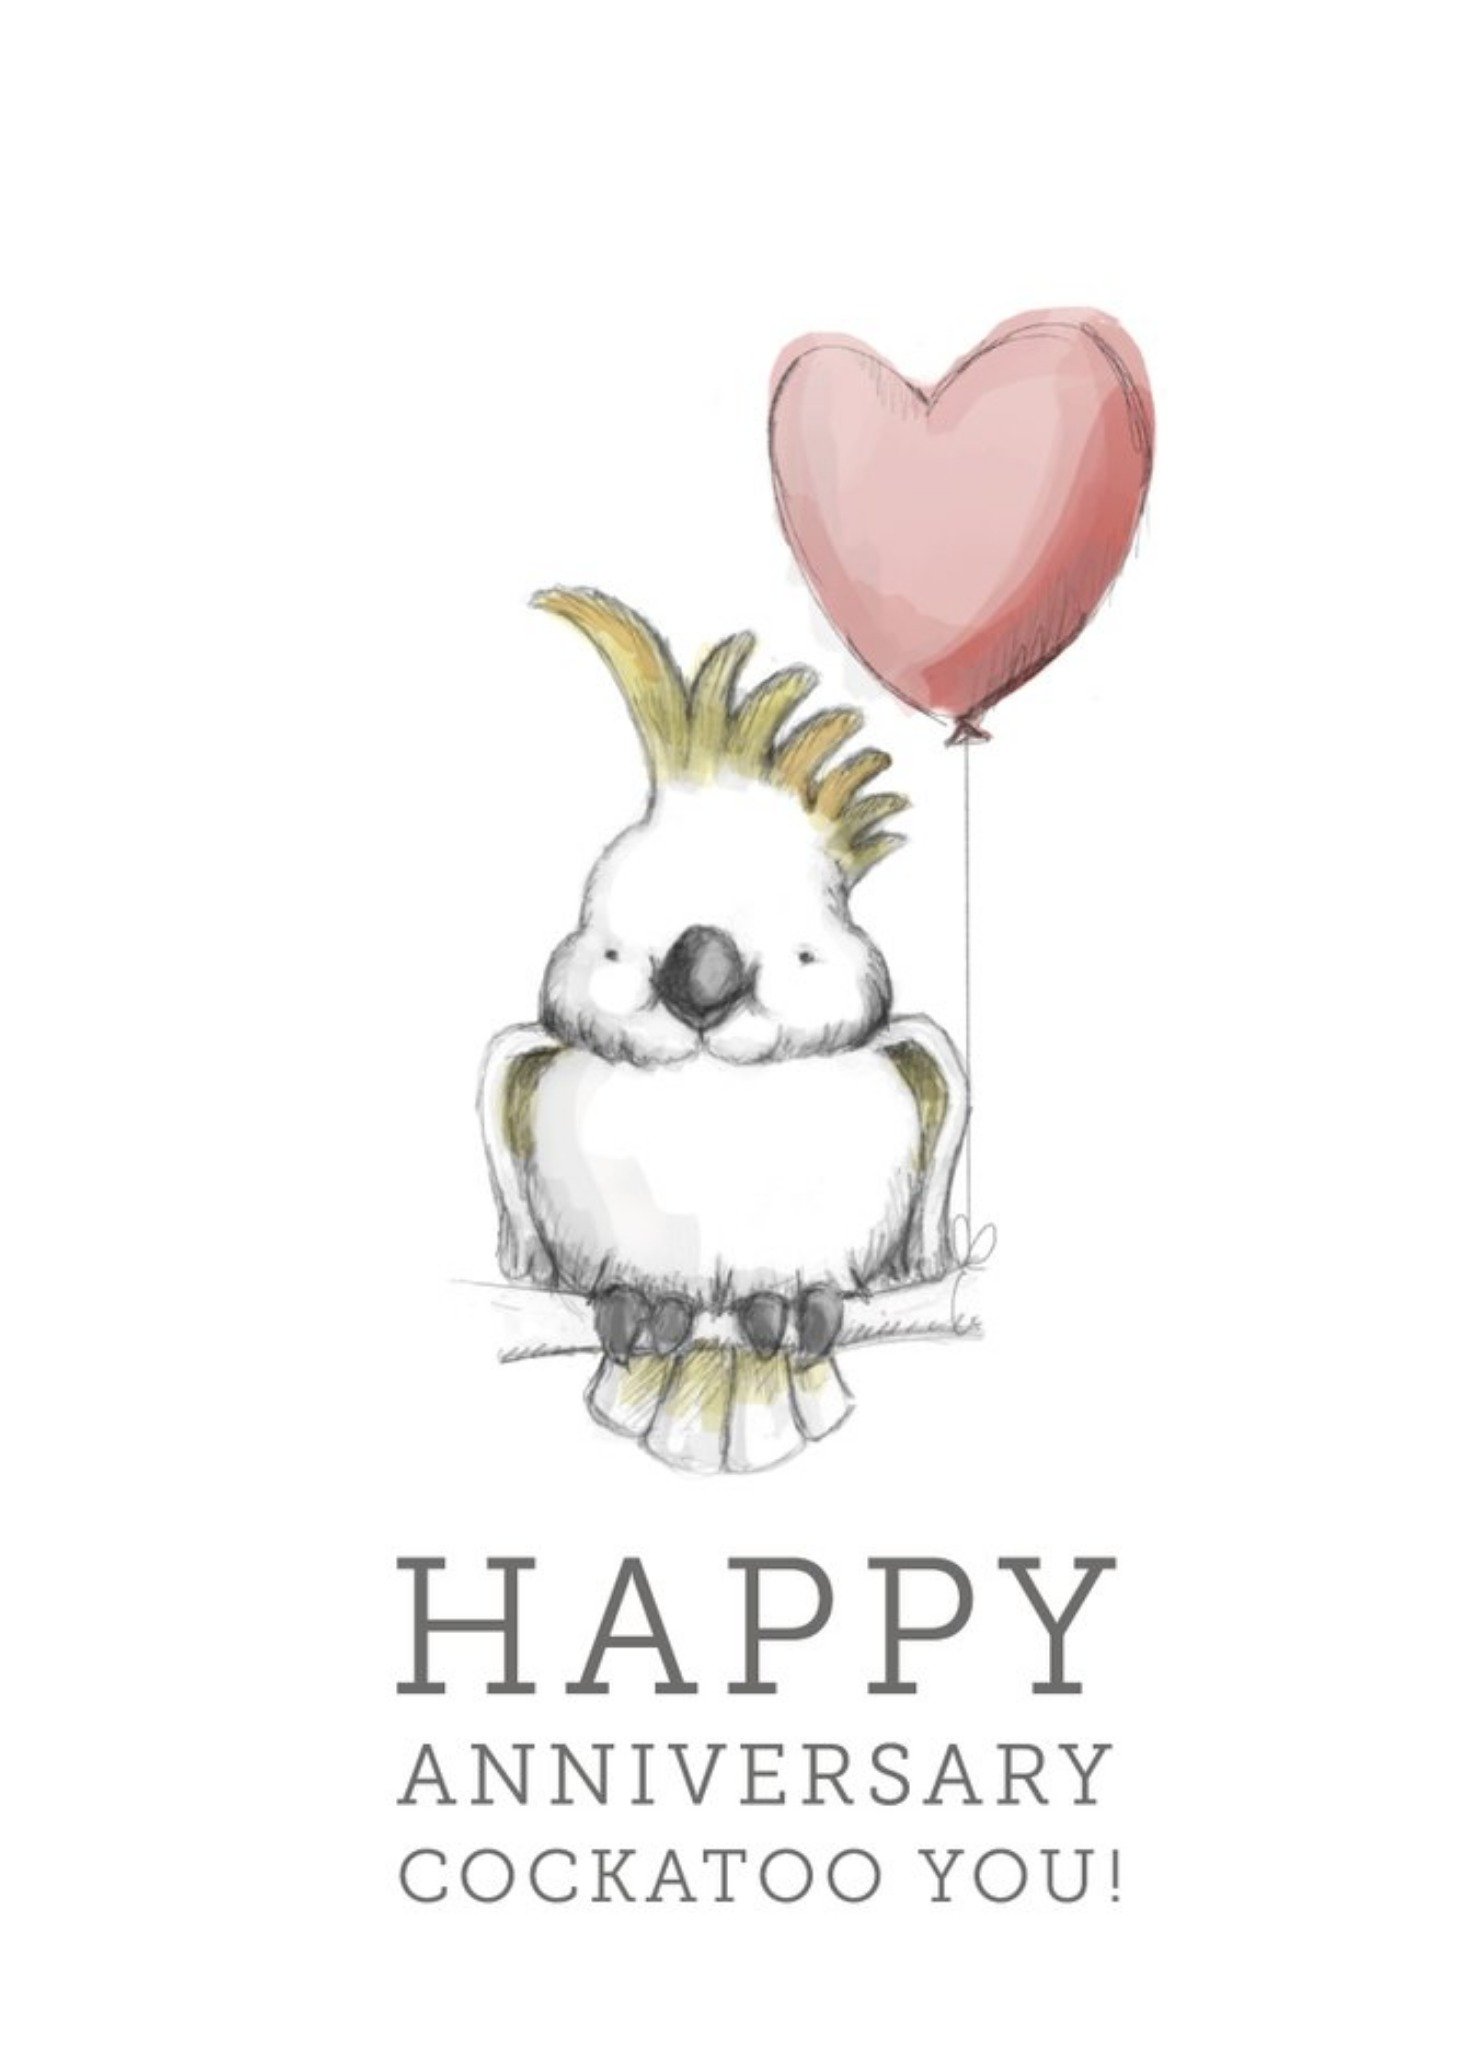 Moonpig Illustration Of A Pair Of Cockatoos With Heart Shaped Balloons Anniversary Card, Large